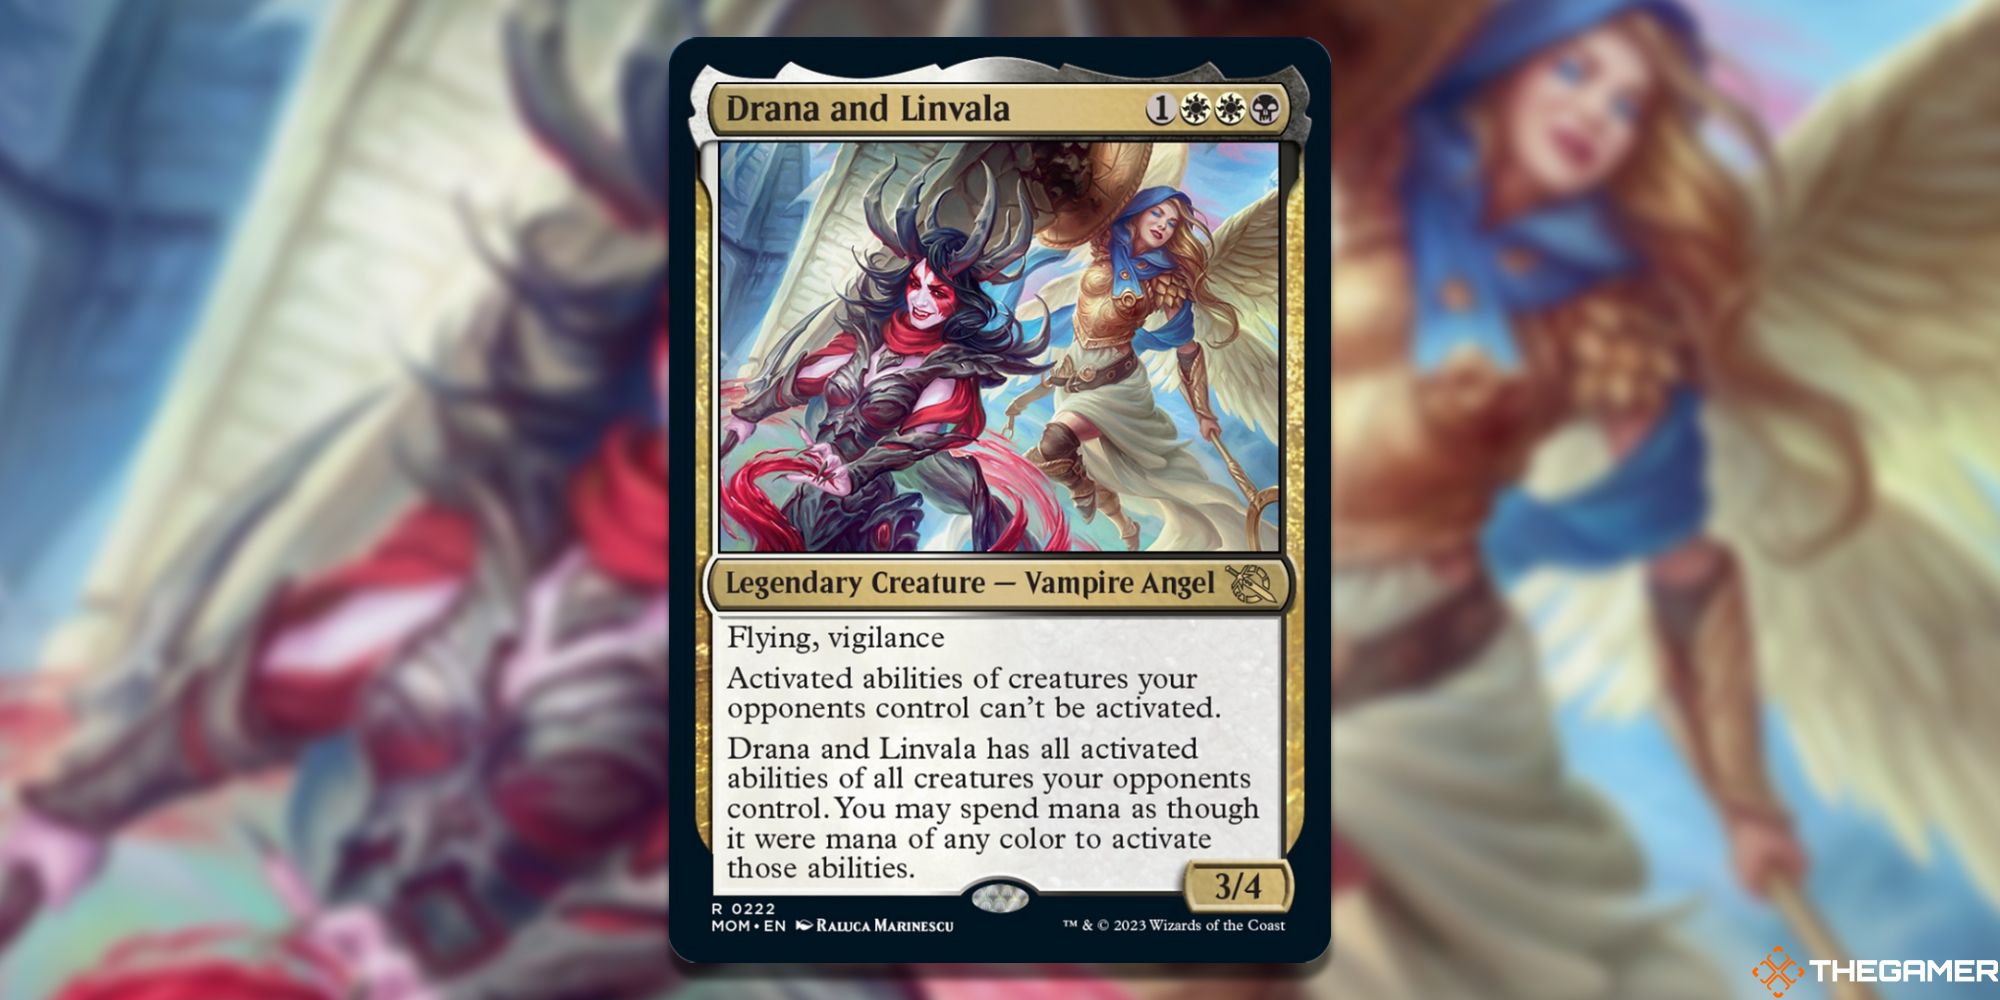 Cards and artwork of Drana and Linvala from Magic the Gathering.